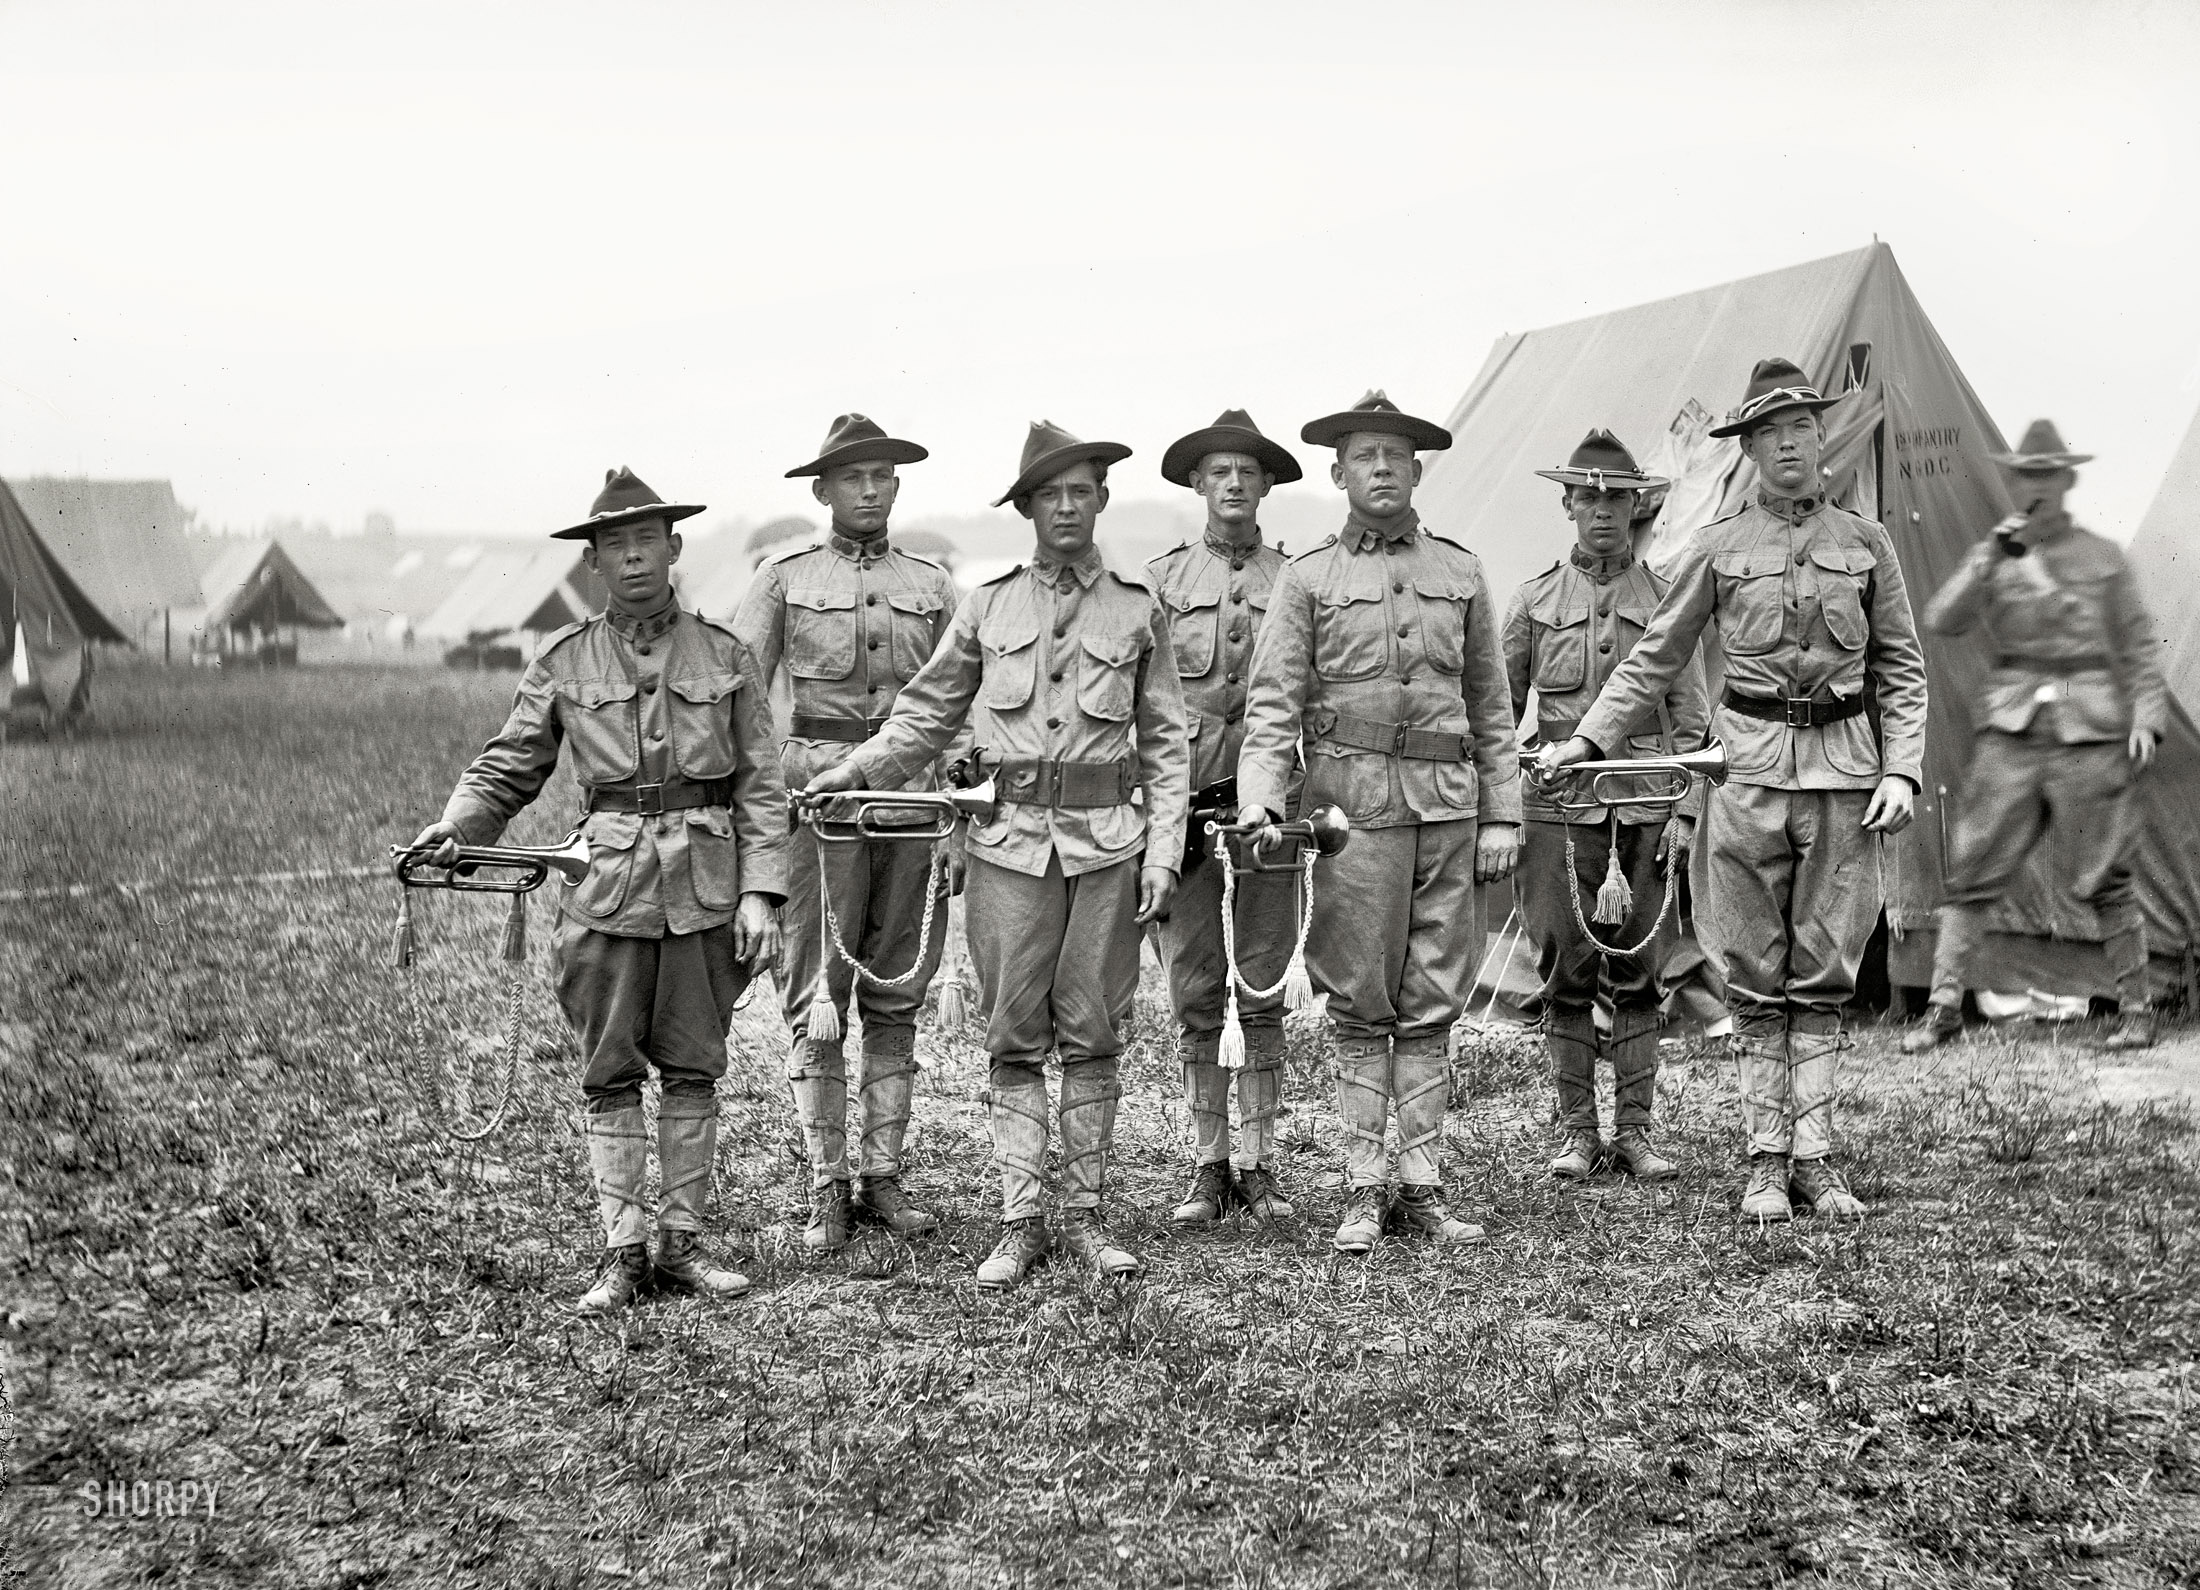 Circa 1915. "Field music -- 1st Regiment. Army buglers, D.C. National Guard." National Photo Company Collection glass negative. View full size.